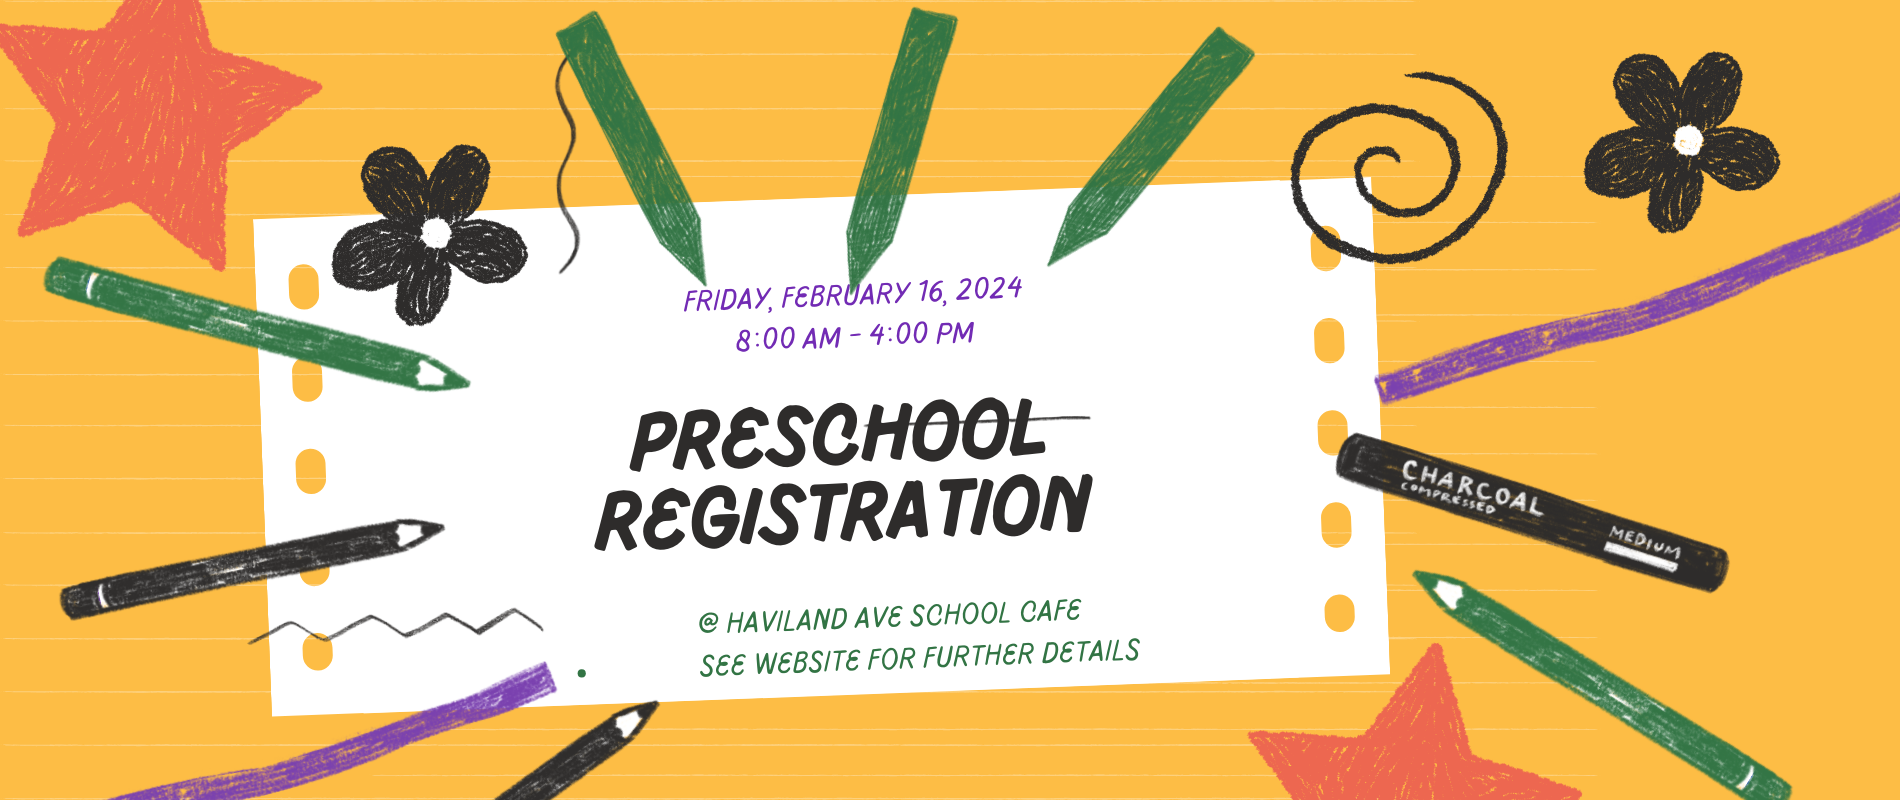 Audubon Preschool Registration 2024   Friday, February 16, 2024 8:00 AM to 4:00 PM @ Haviland Ave School Cafe See Website for further details.